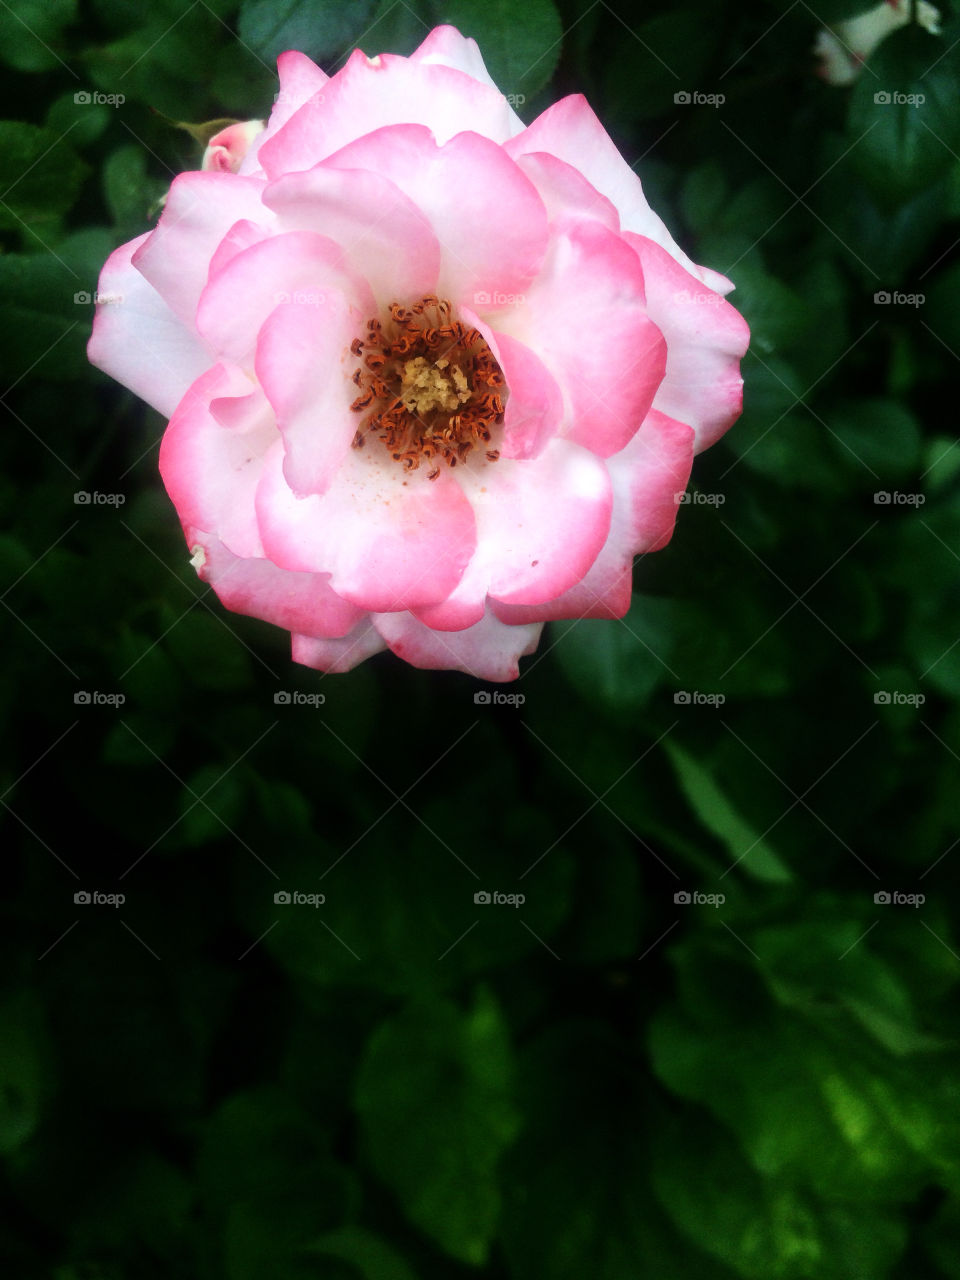 A pink rose blooming in the garden